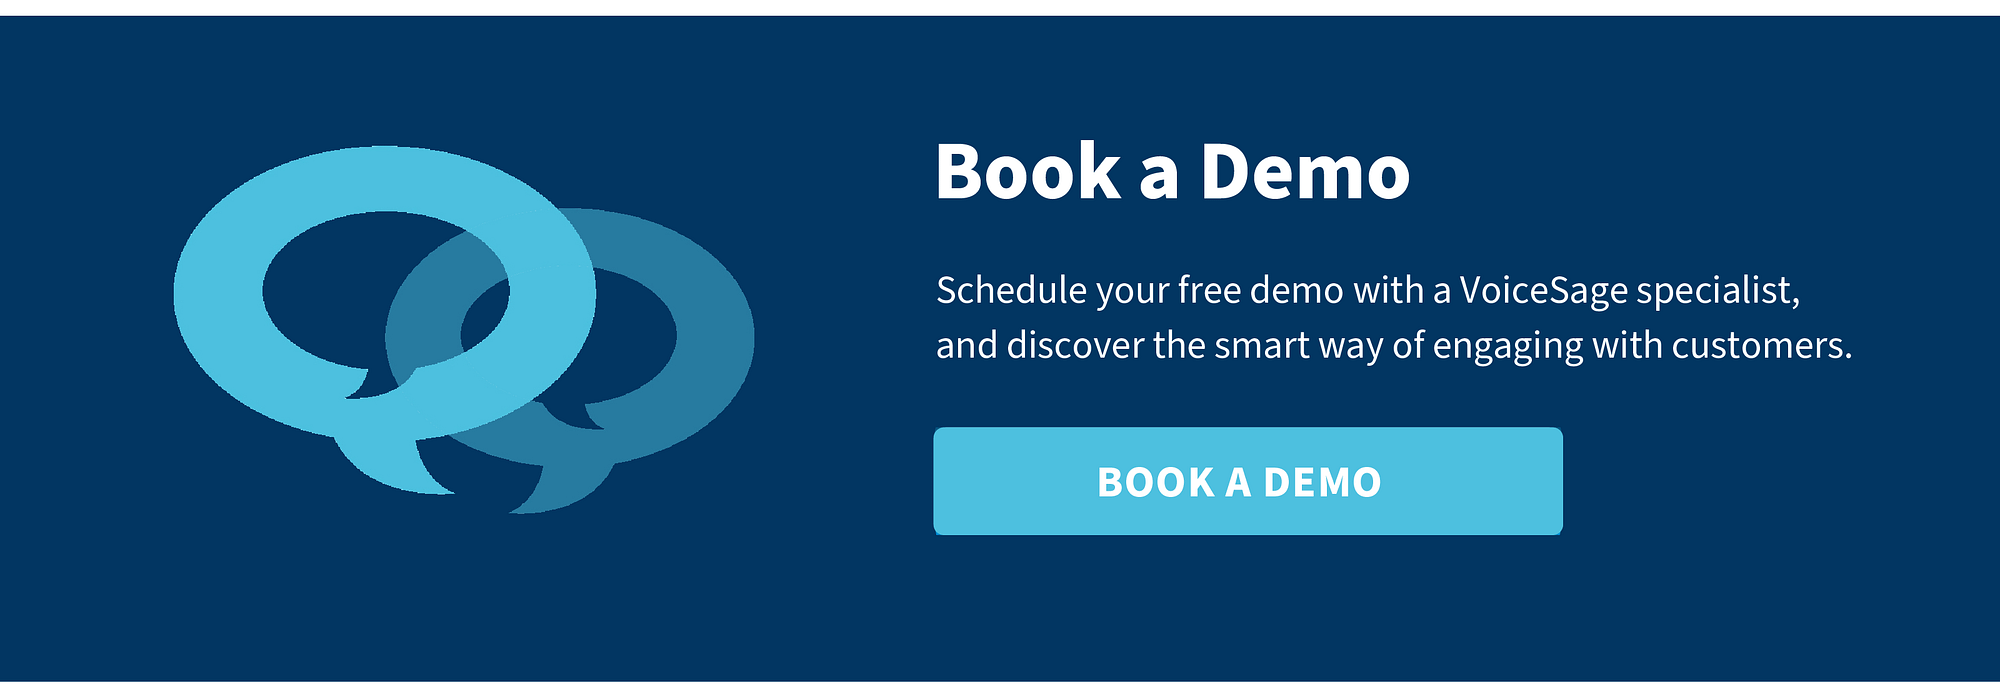 Book a demo to learn more about proactive messaging